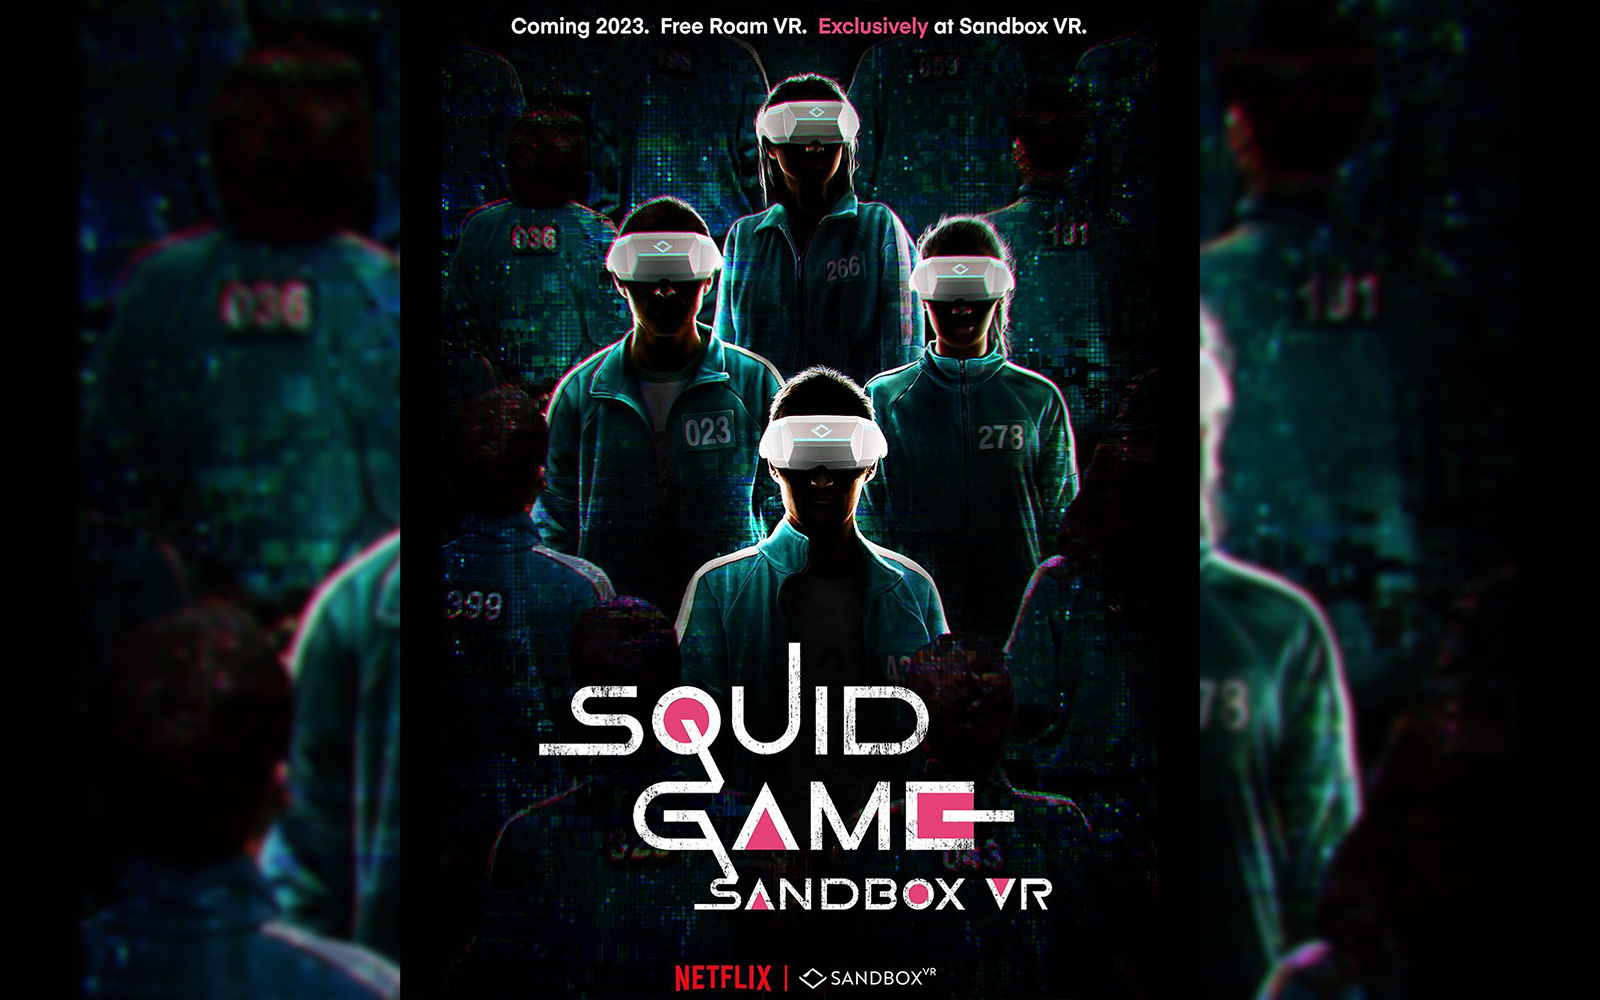 ‘Squid Game’ is coming to VR later this year